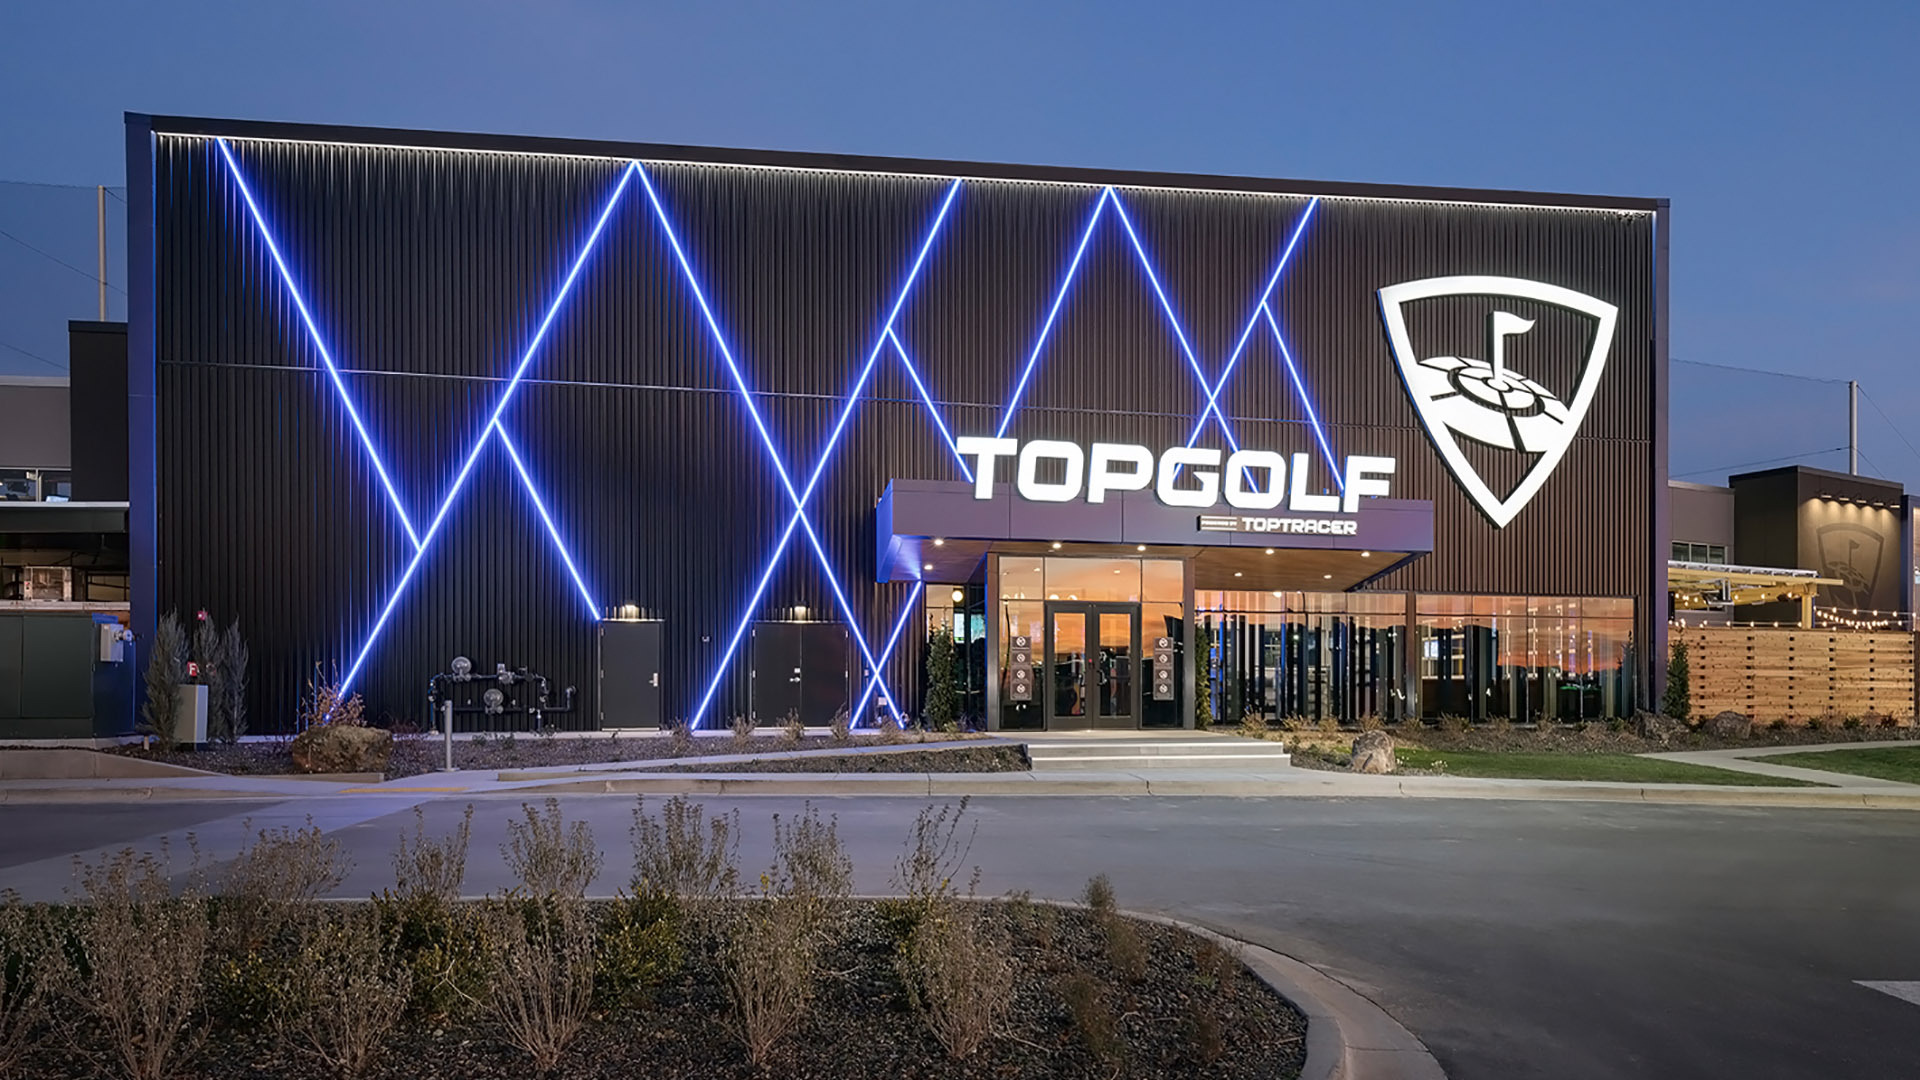 Exterior View of Topgolf Boise